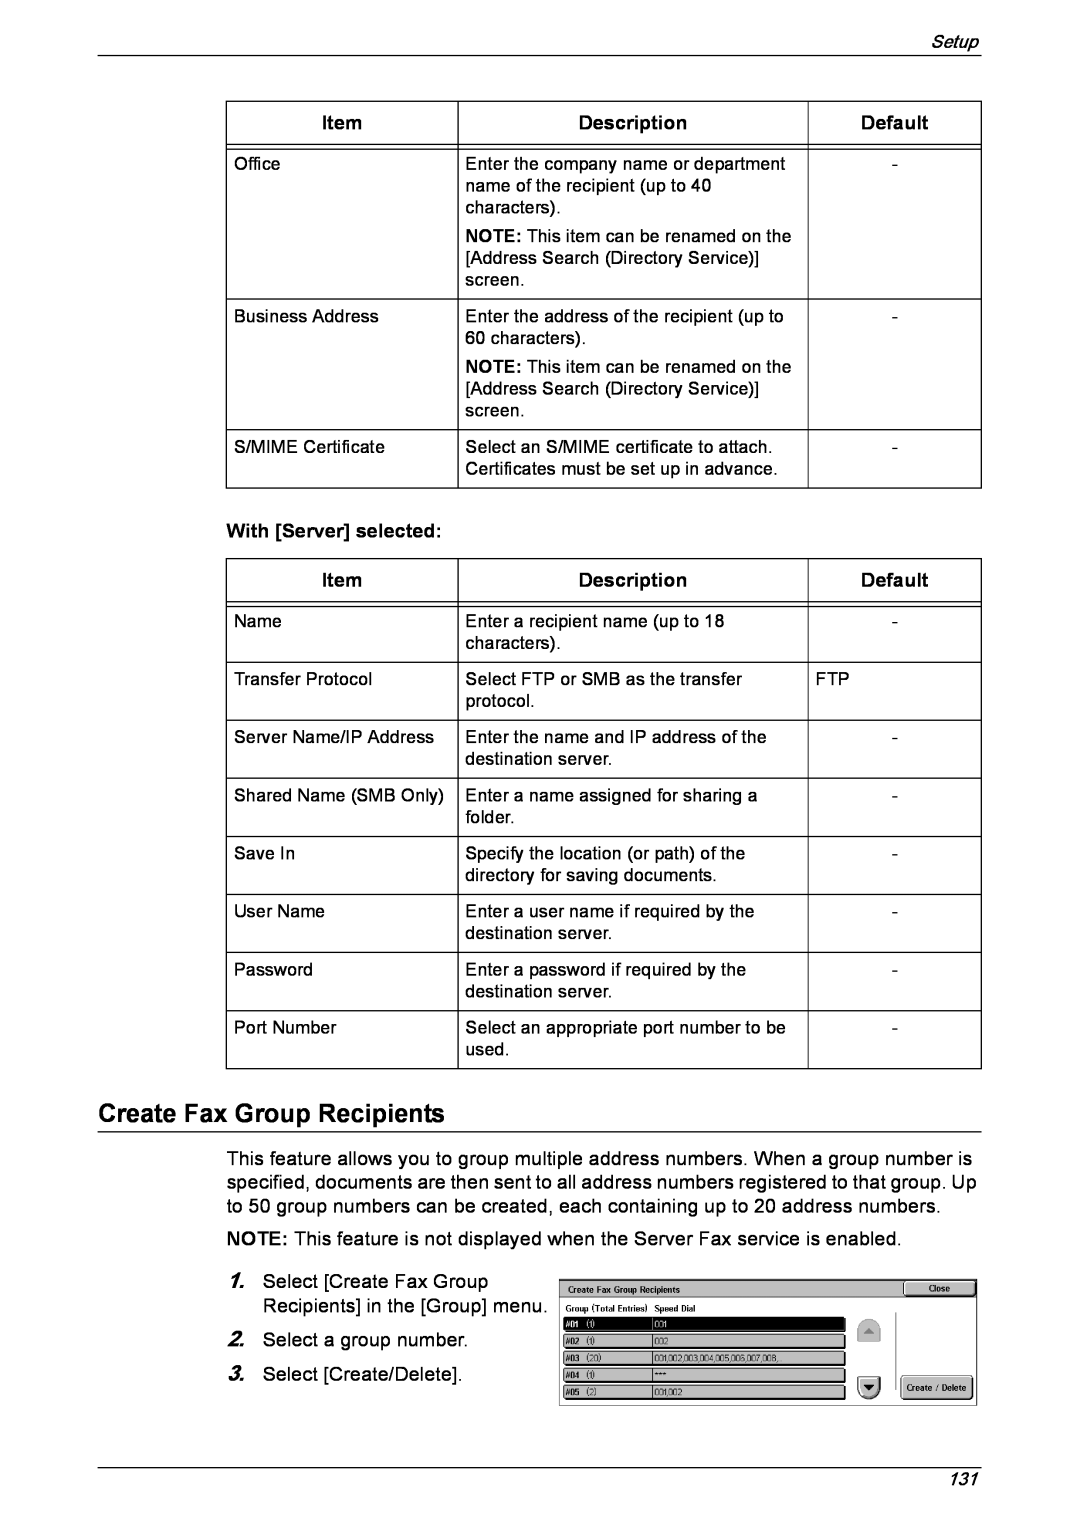 Xerox 5222 manual Create Fax Group Recipients, Item, Description, Default, With Server selected 